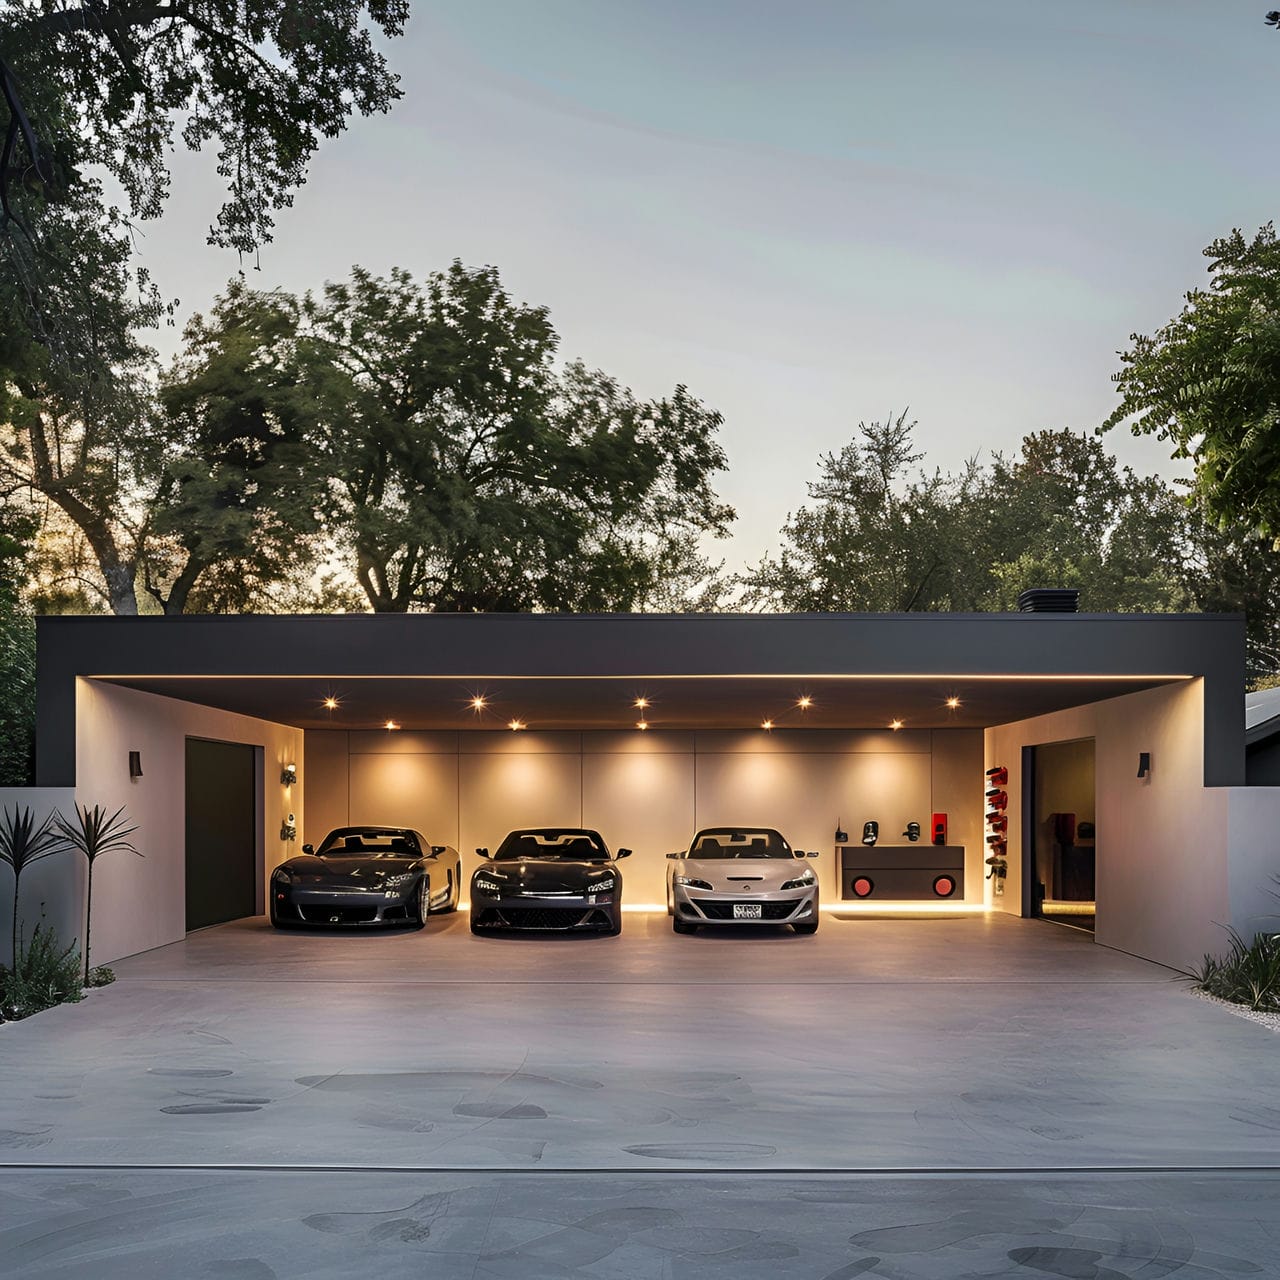 Garage: size, functionality, uses, furniture and renovation